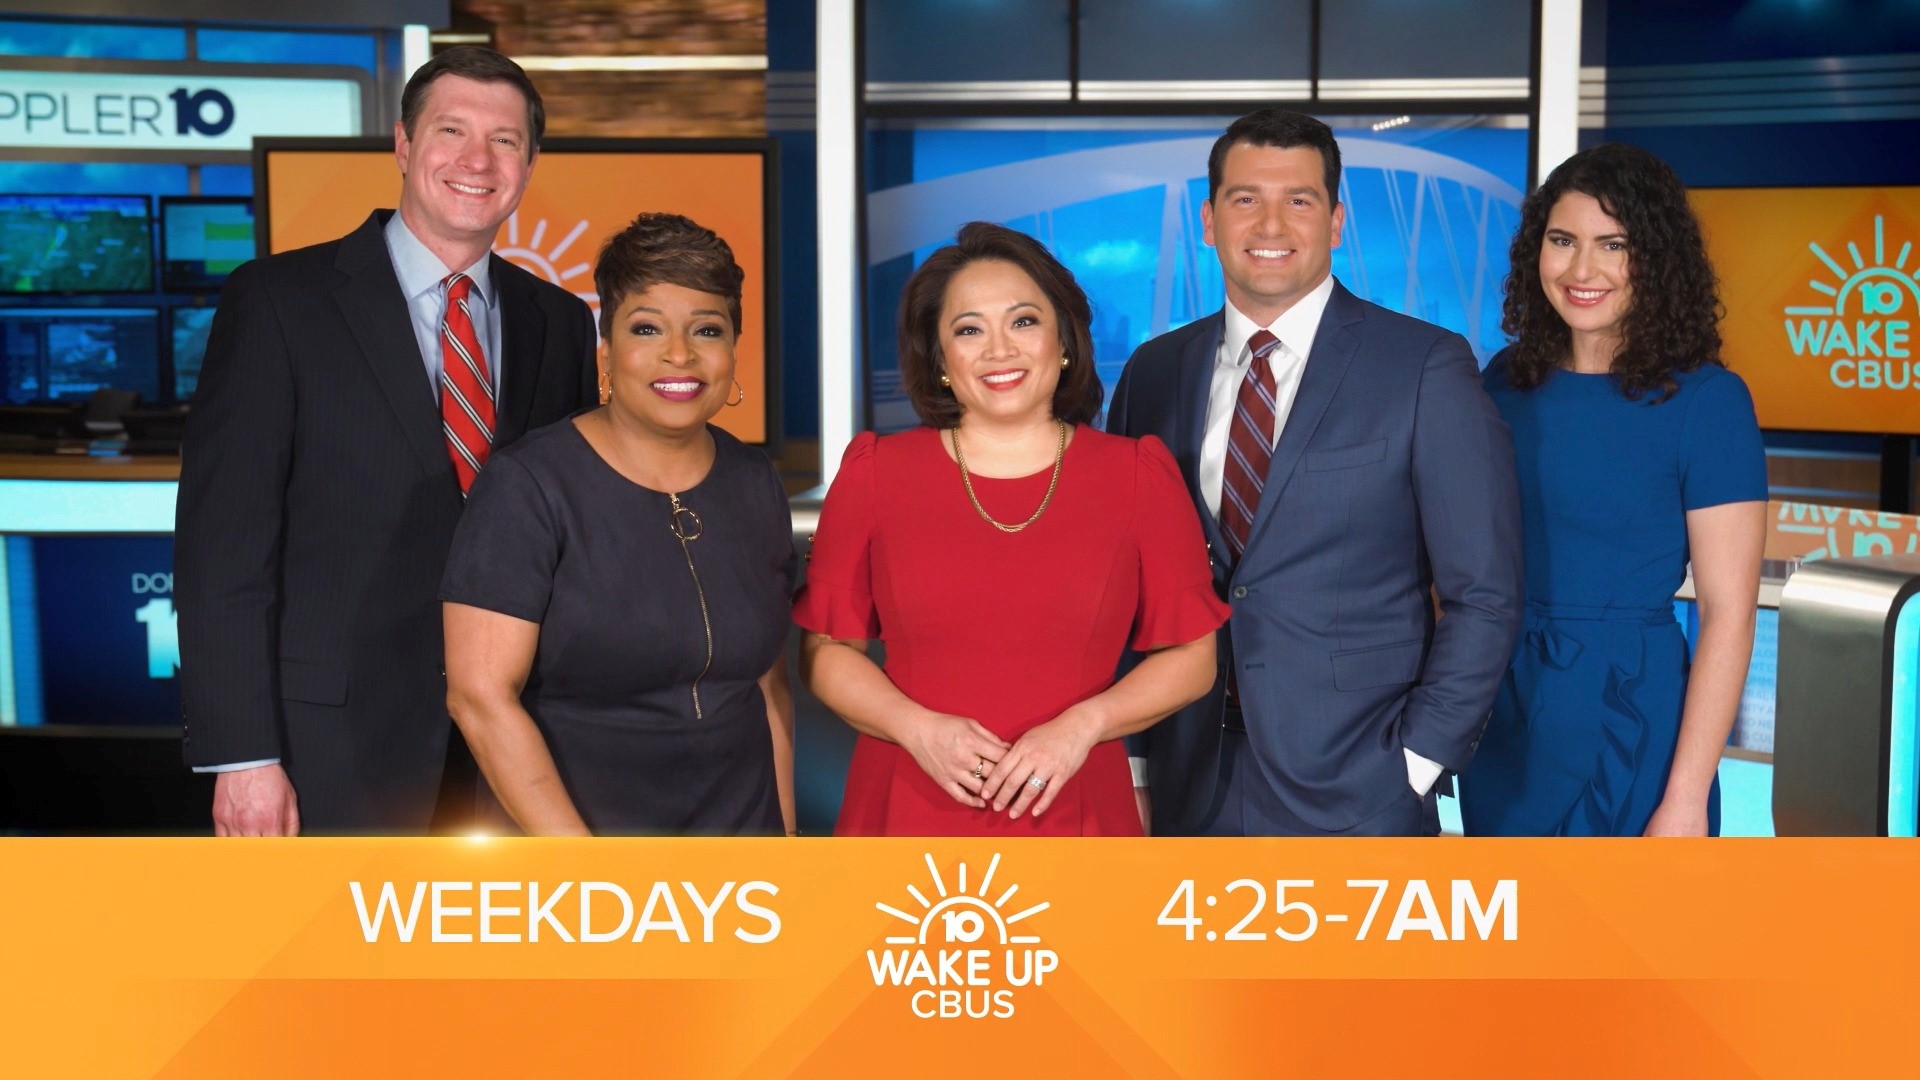 Join Angela An, Tracy Townsend, Clay Gordon, Jeff Booth and Gabriela Garcia weekdays starting at 4:25 a.m. on 10TV.